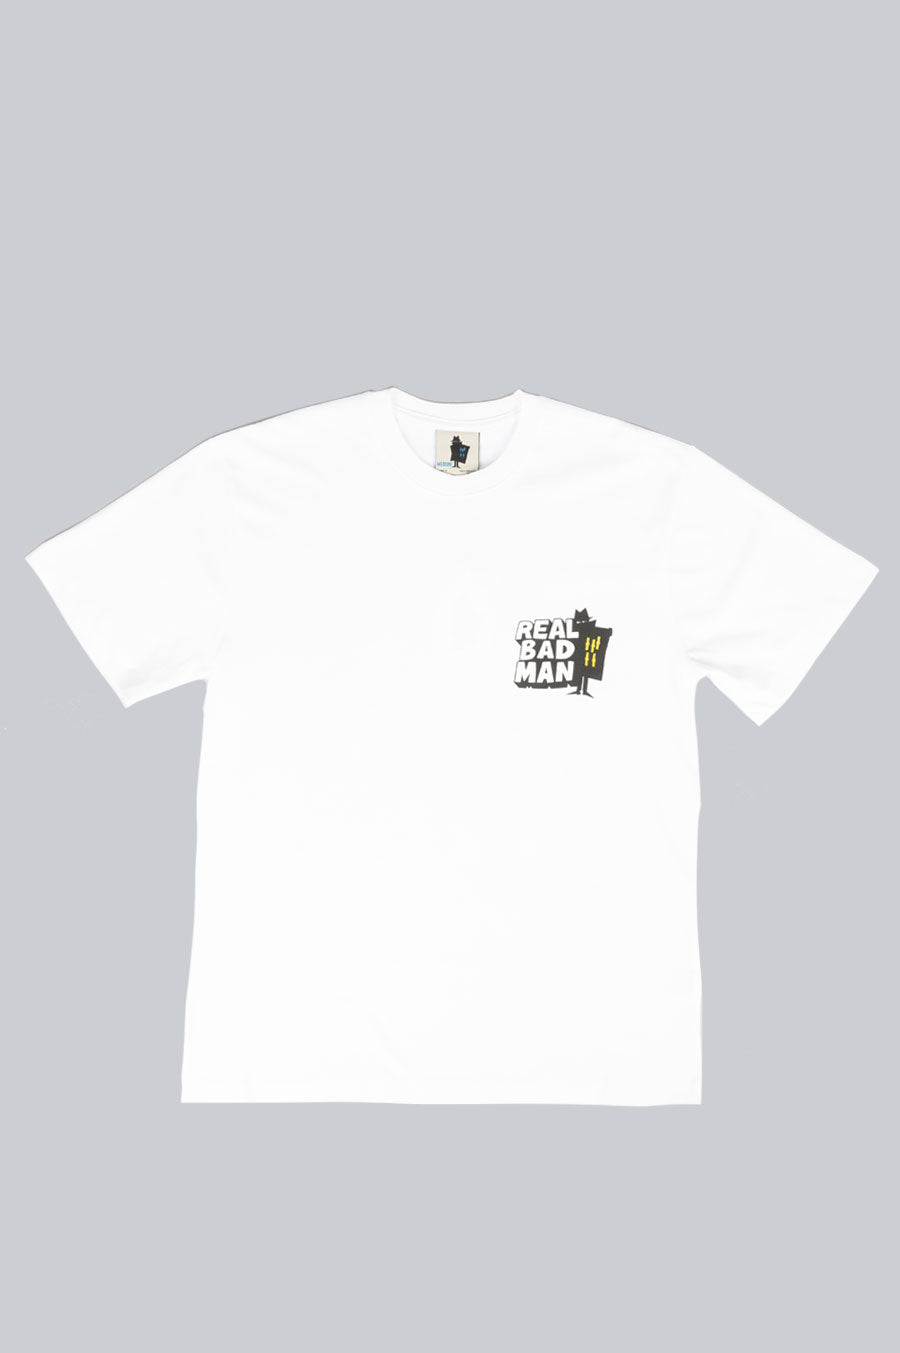 REAL BAD MAN WHO GOES THERE SS TEE WHITE